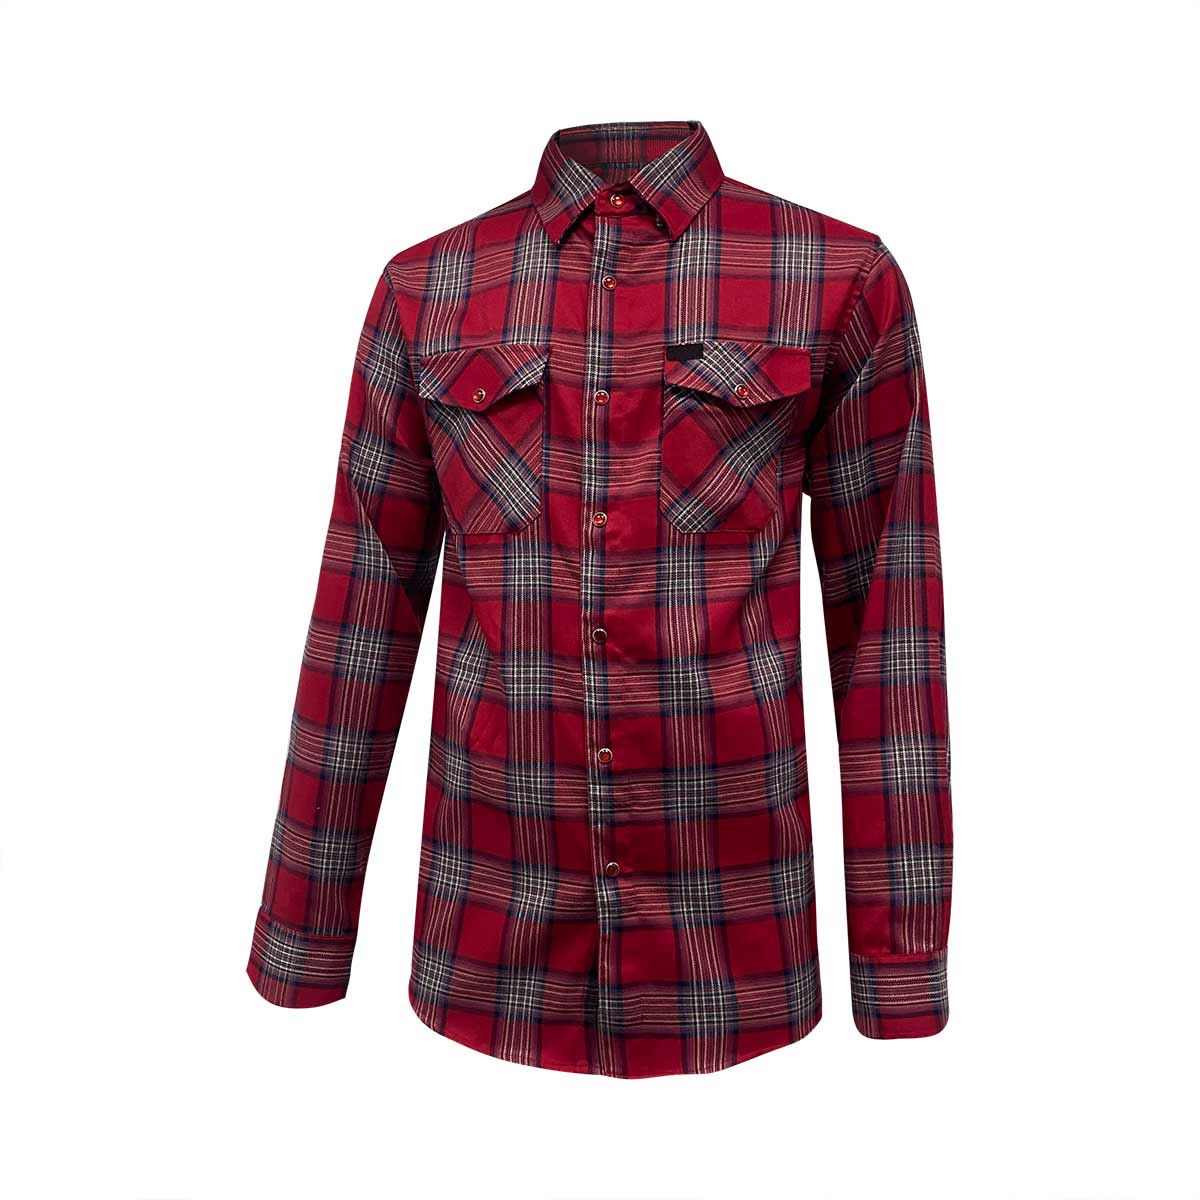 TianYun classic red plaids with snap button flannel shirts